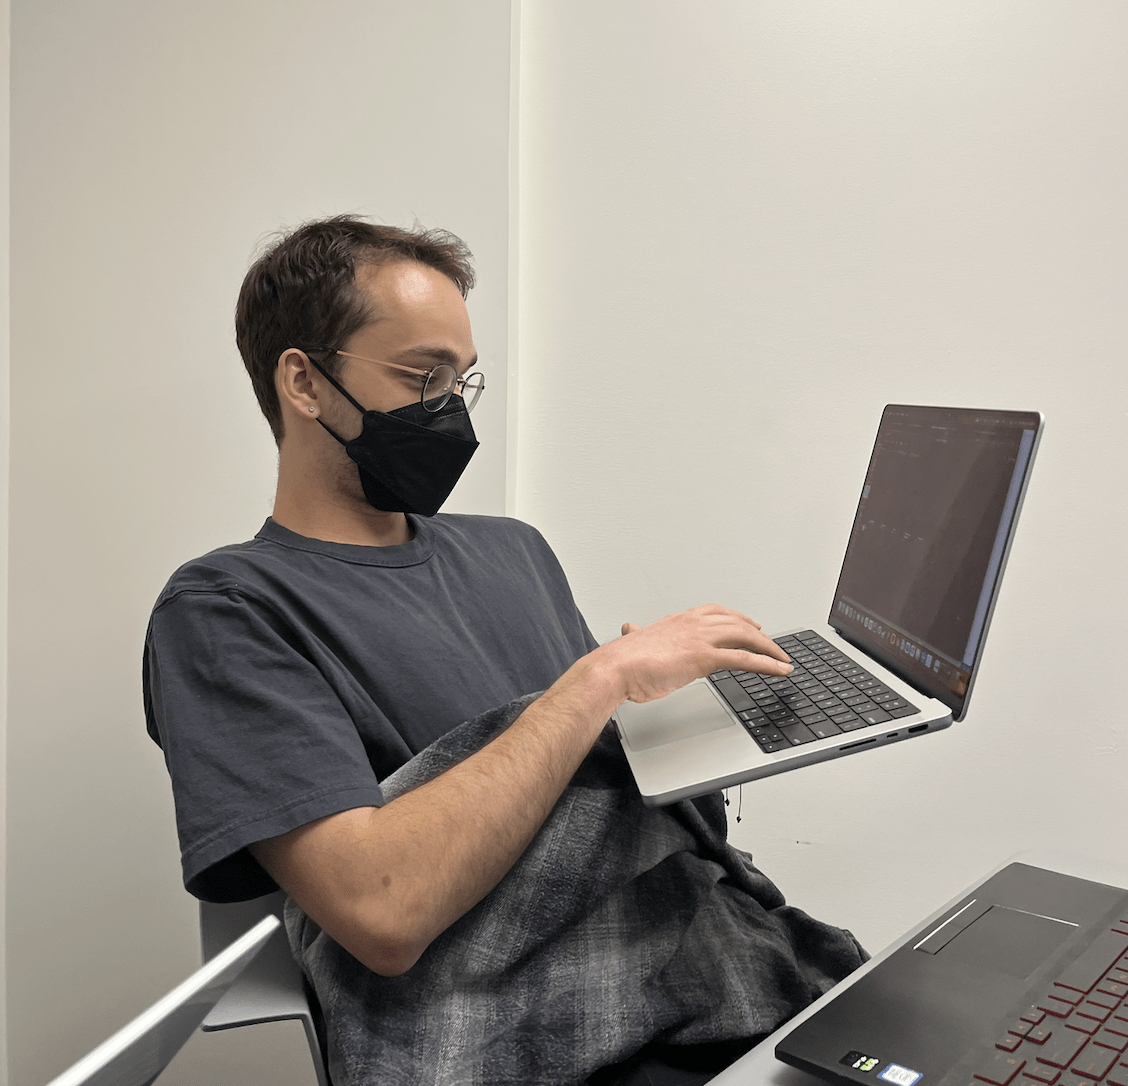 A Caucasian man in a black mask and circlular rimmed glasses sits in a chair while holding a laptop up with his left hand and tapping on the keyboard with his right.